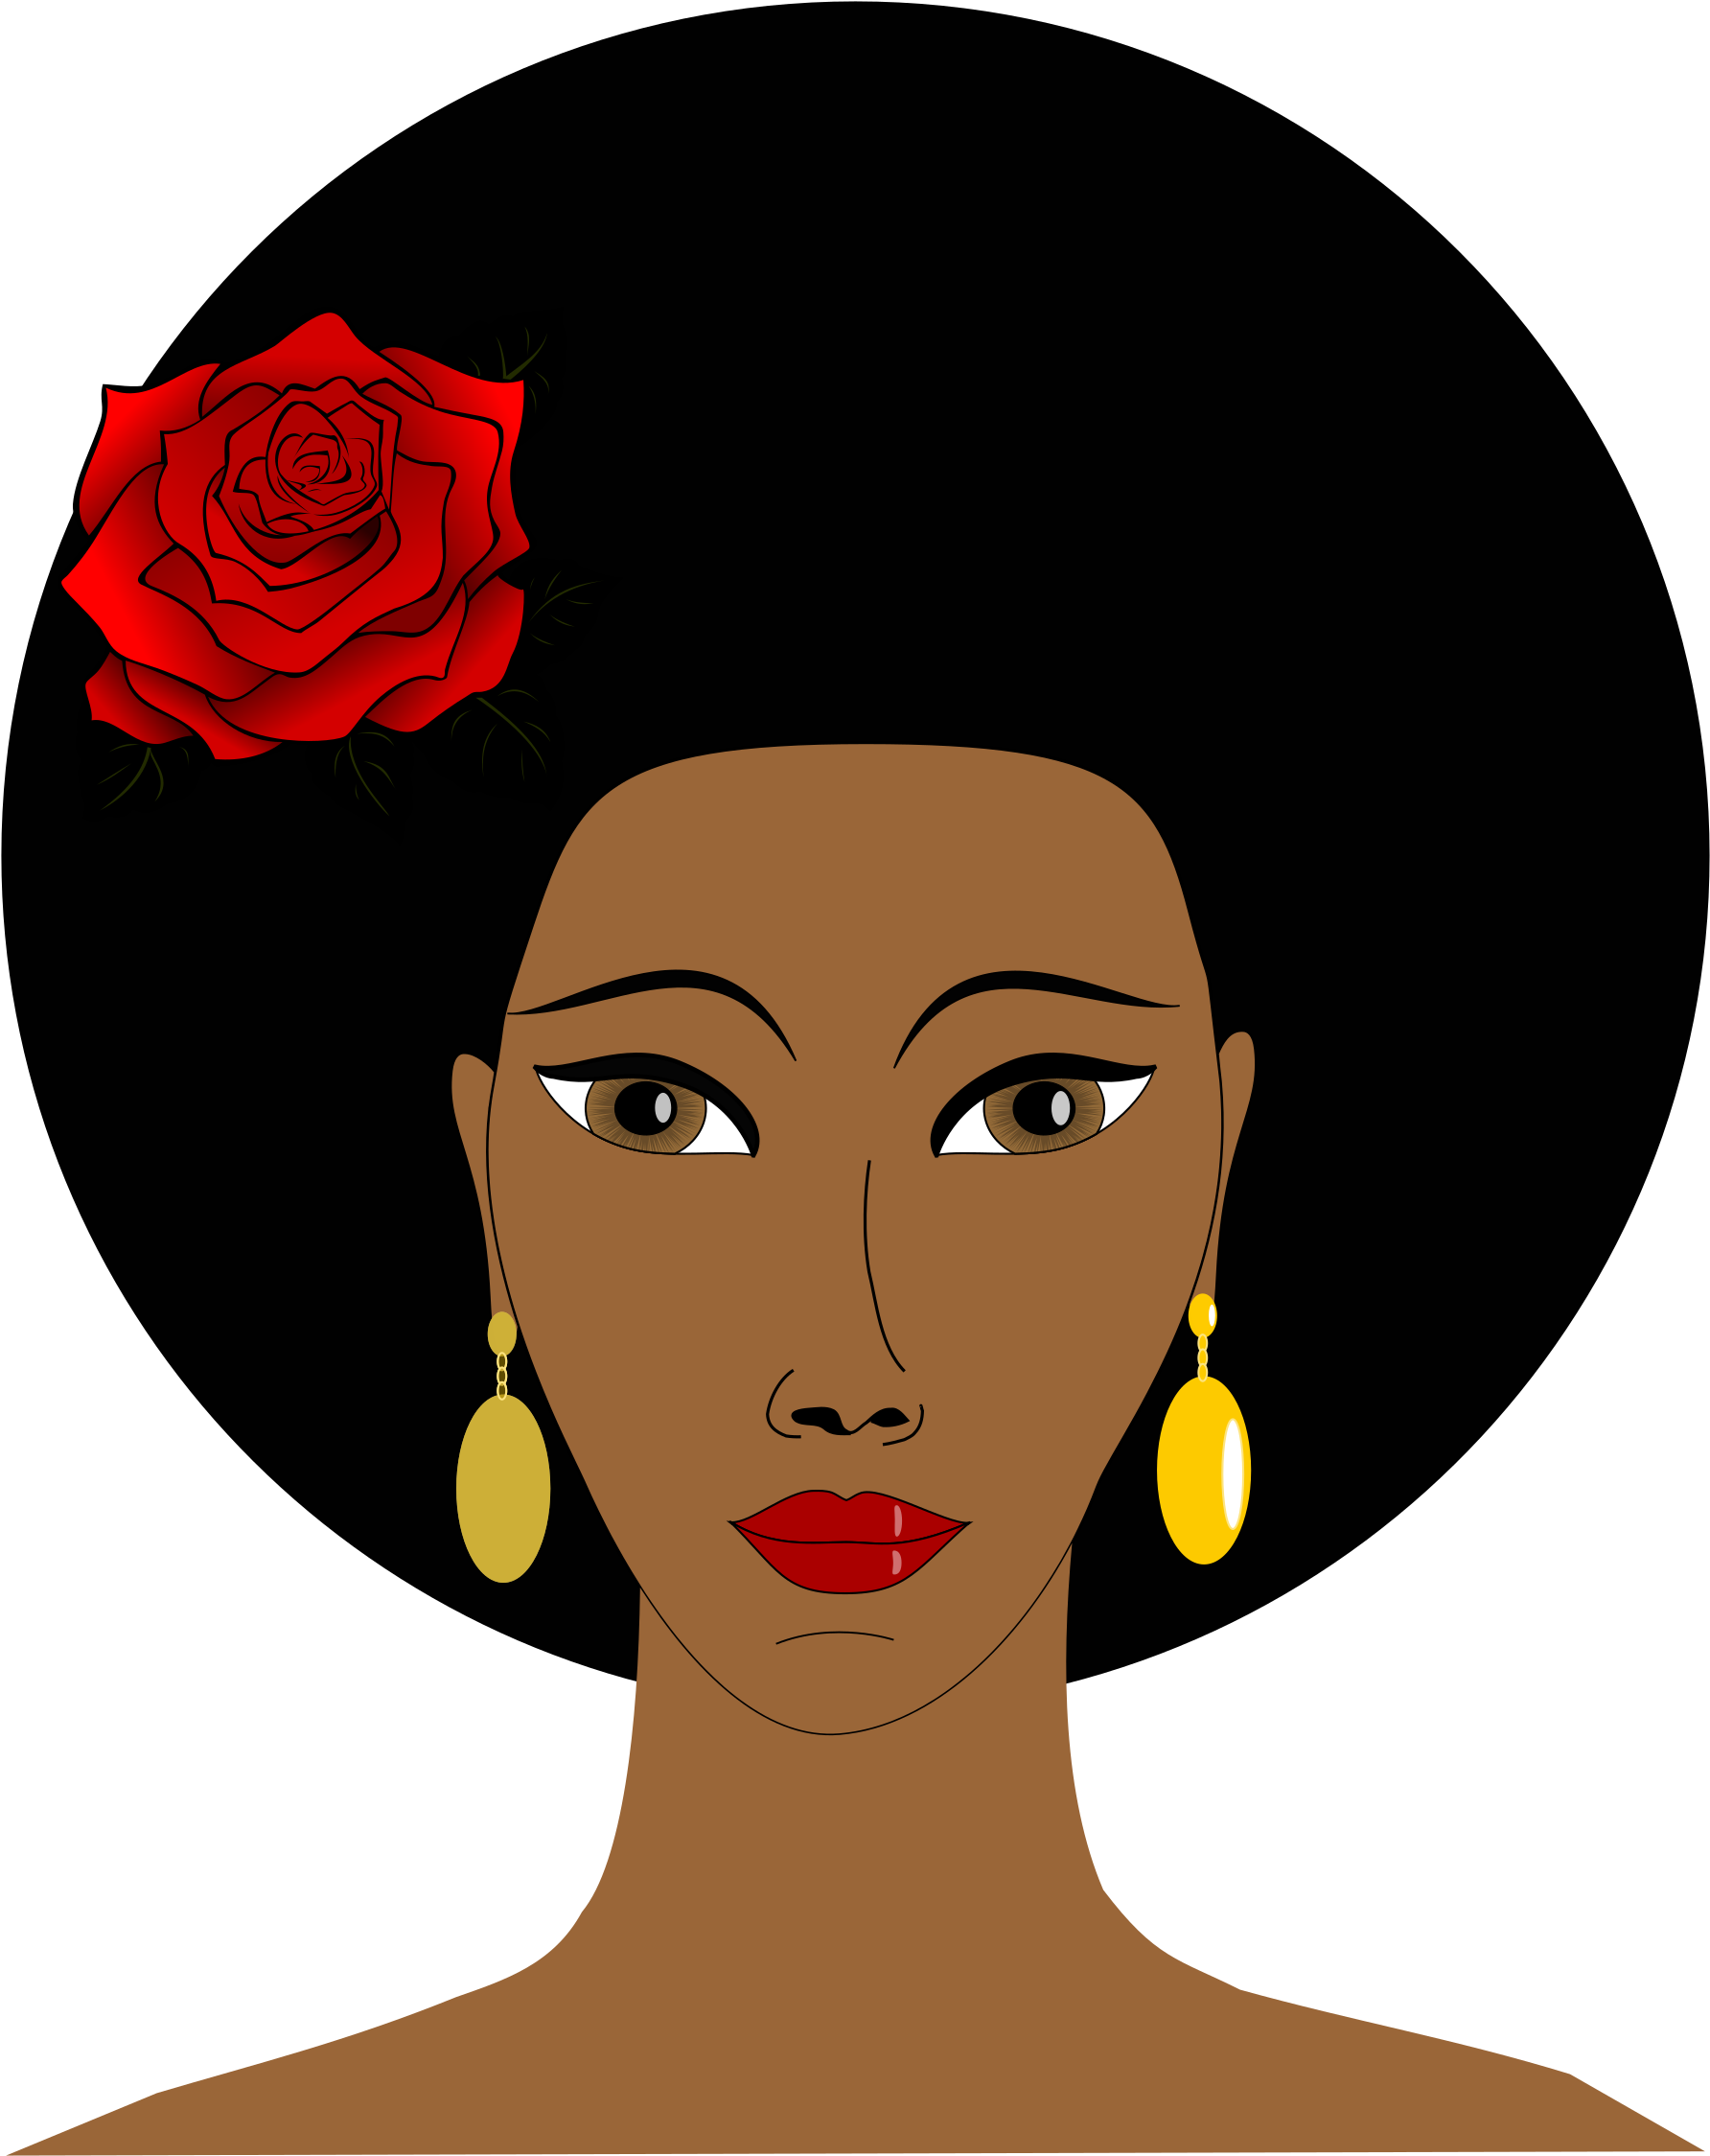 Black Woman With A Rose - Black Woman Icon Png (1935x2400)